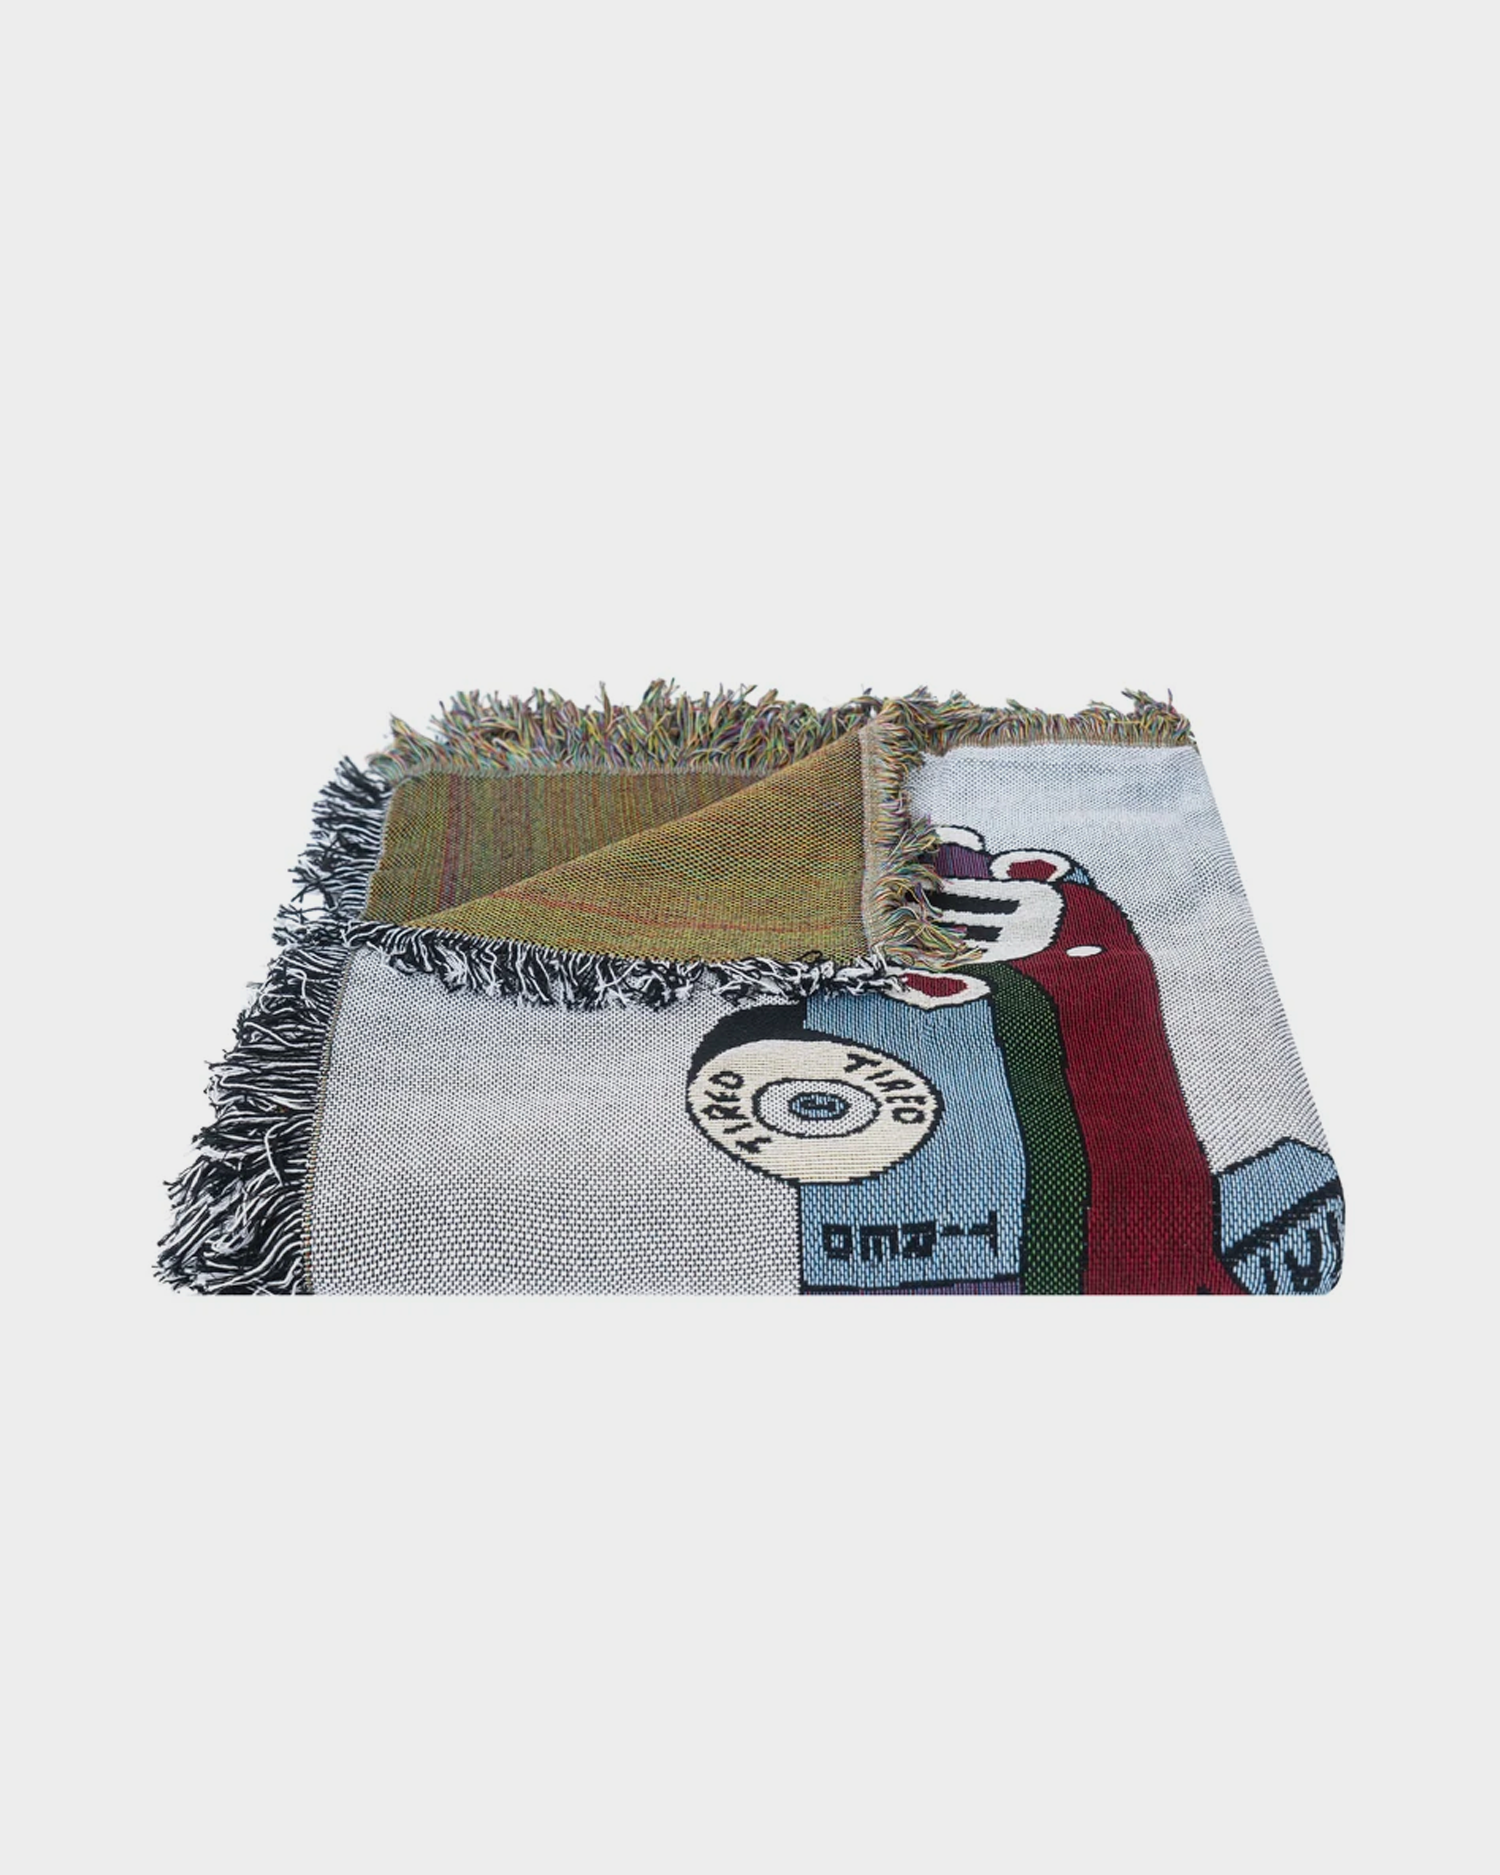 Tired Collage Throw Blanket